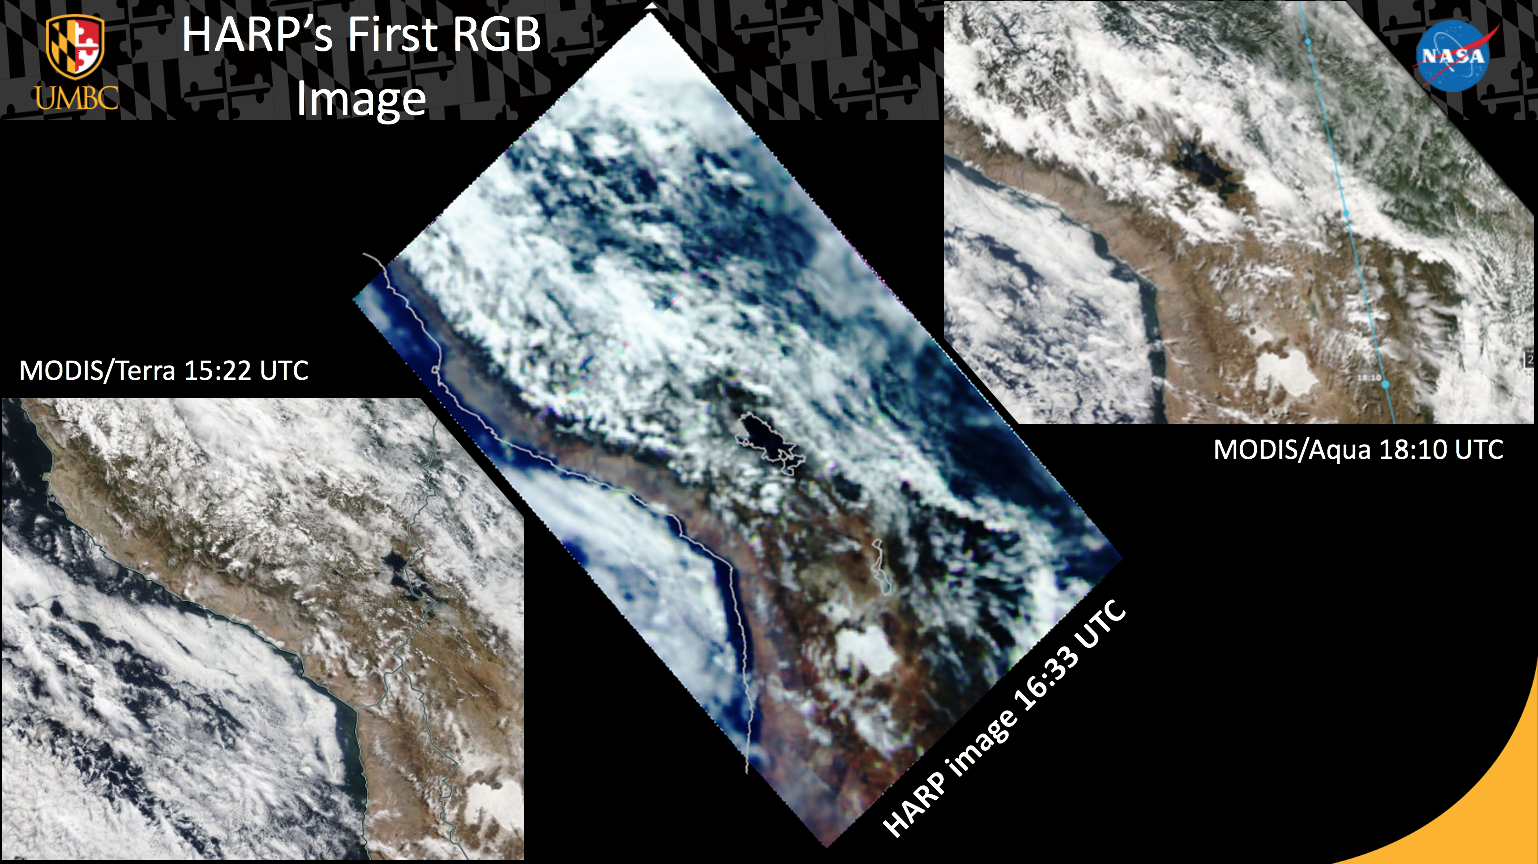 New HARP CubeSat Imagery over South America